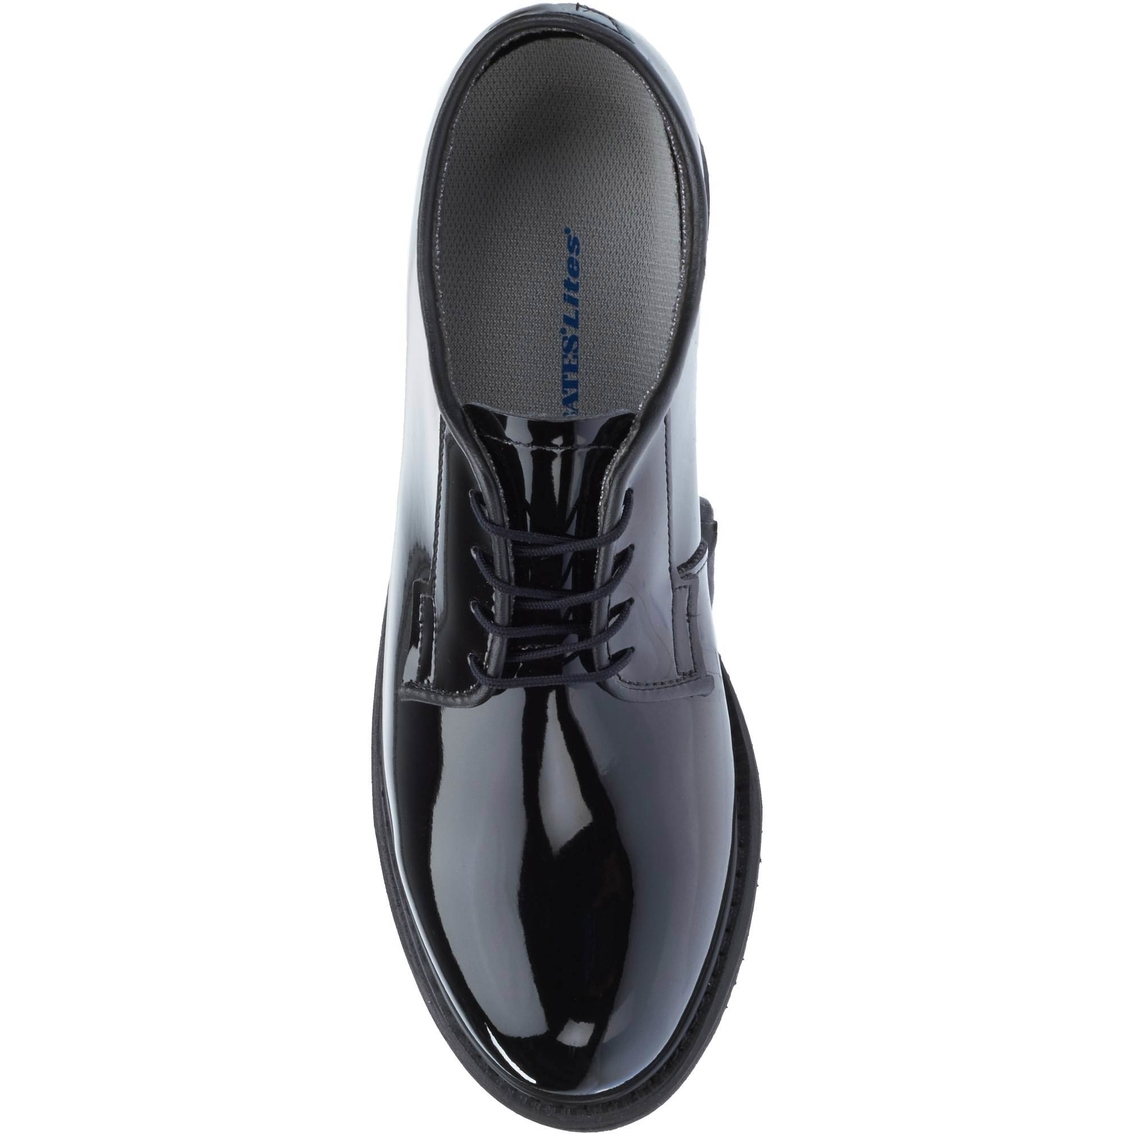 Bate Women's Black Oxford Shoes 731 - Image 7 of 8